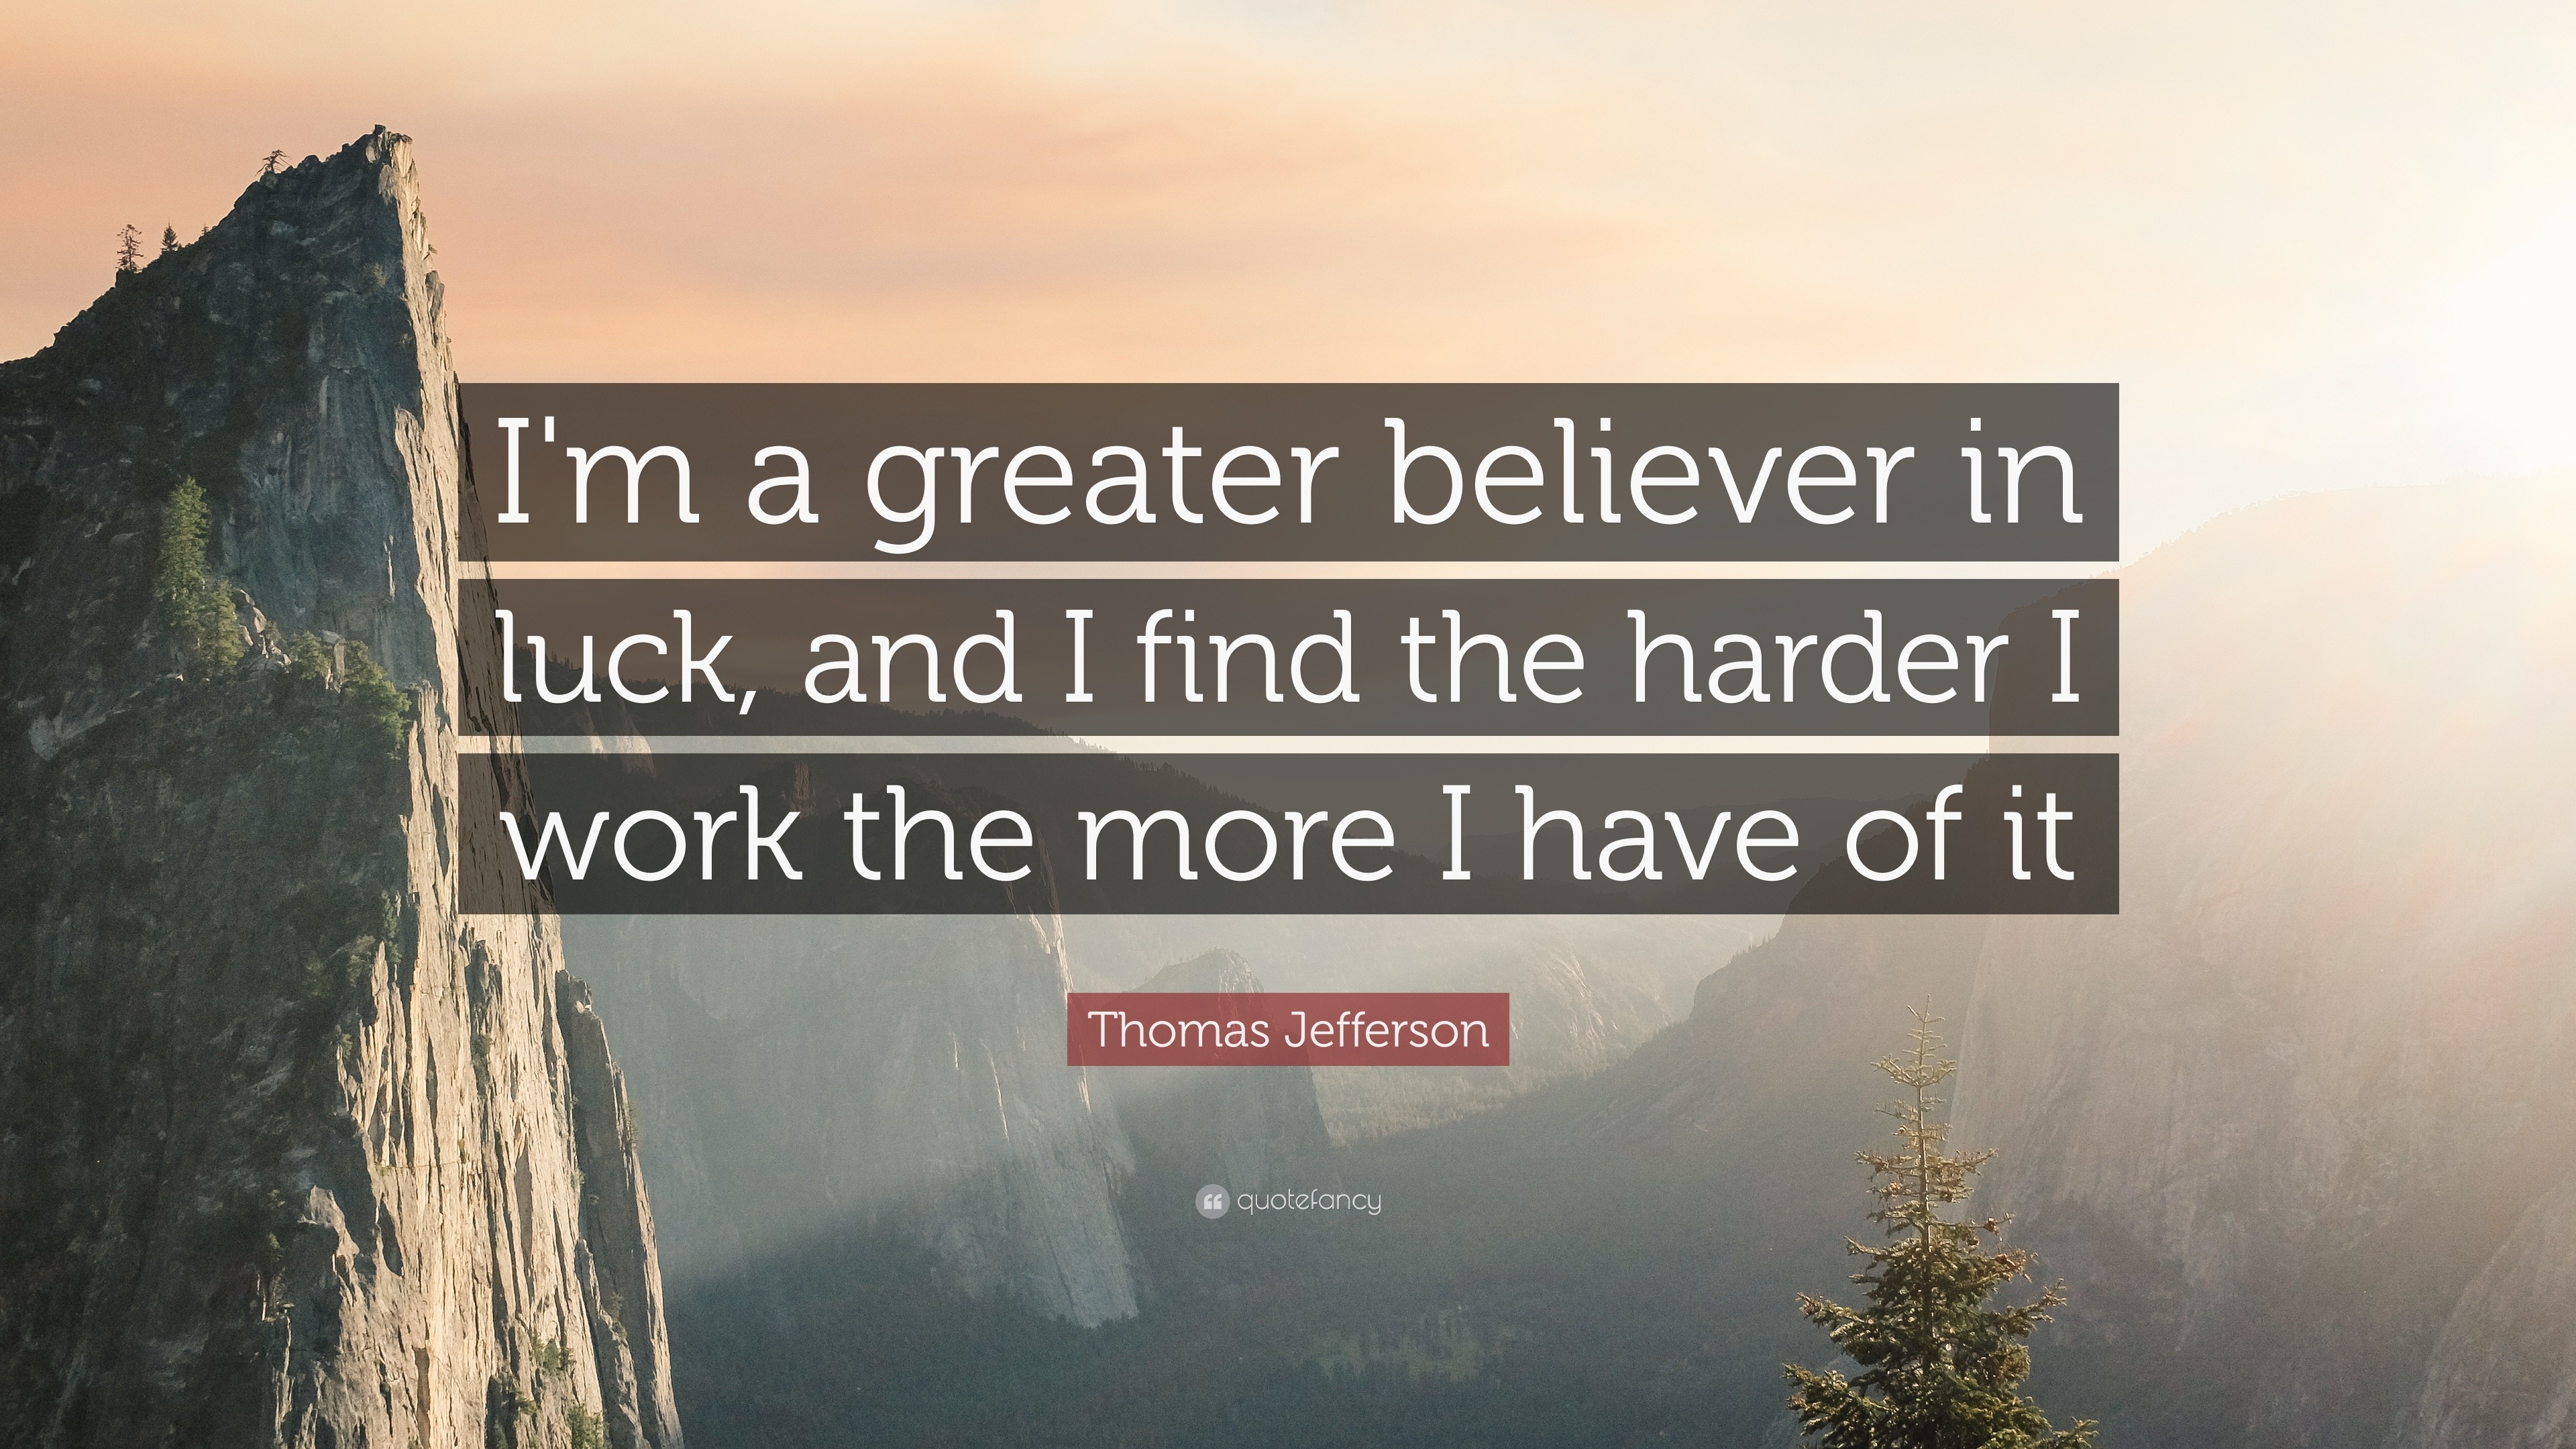 Thomas Jefferson Quote: "I'm a greater believer in luck, and I find the ...